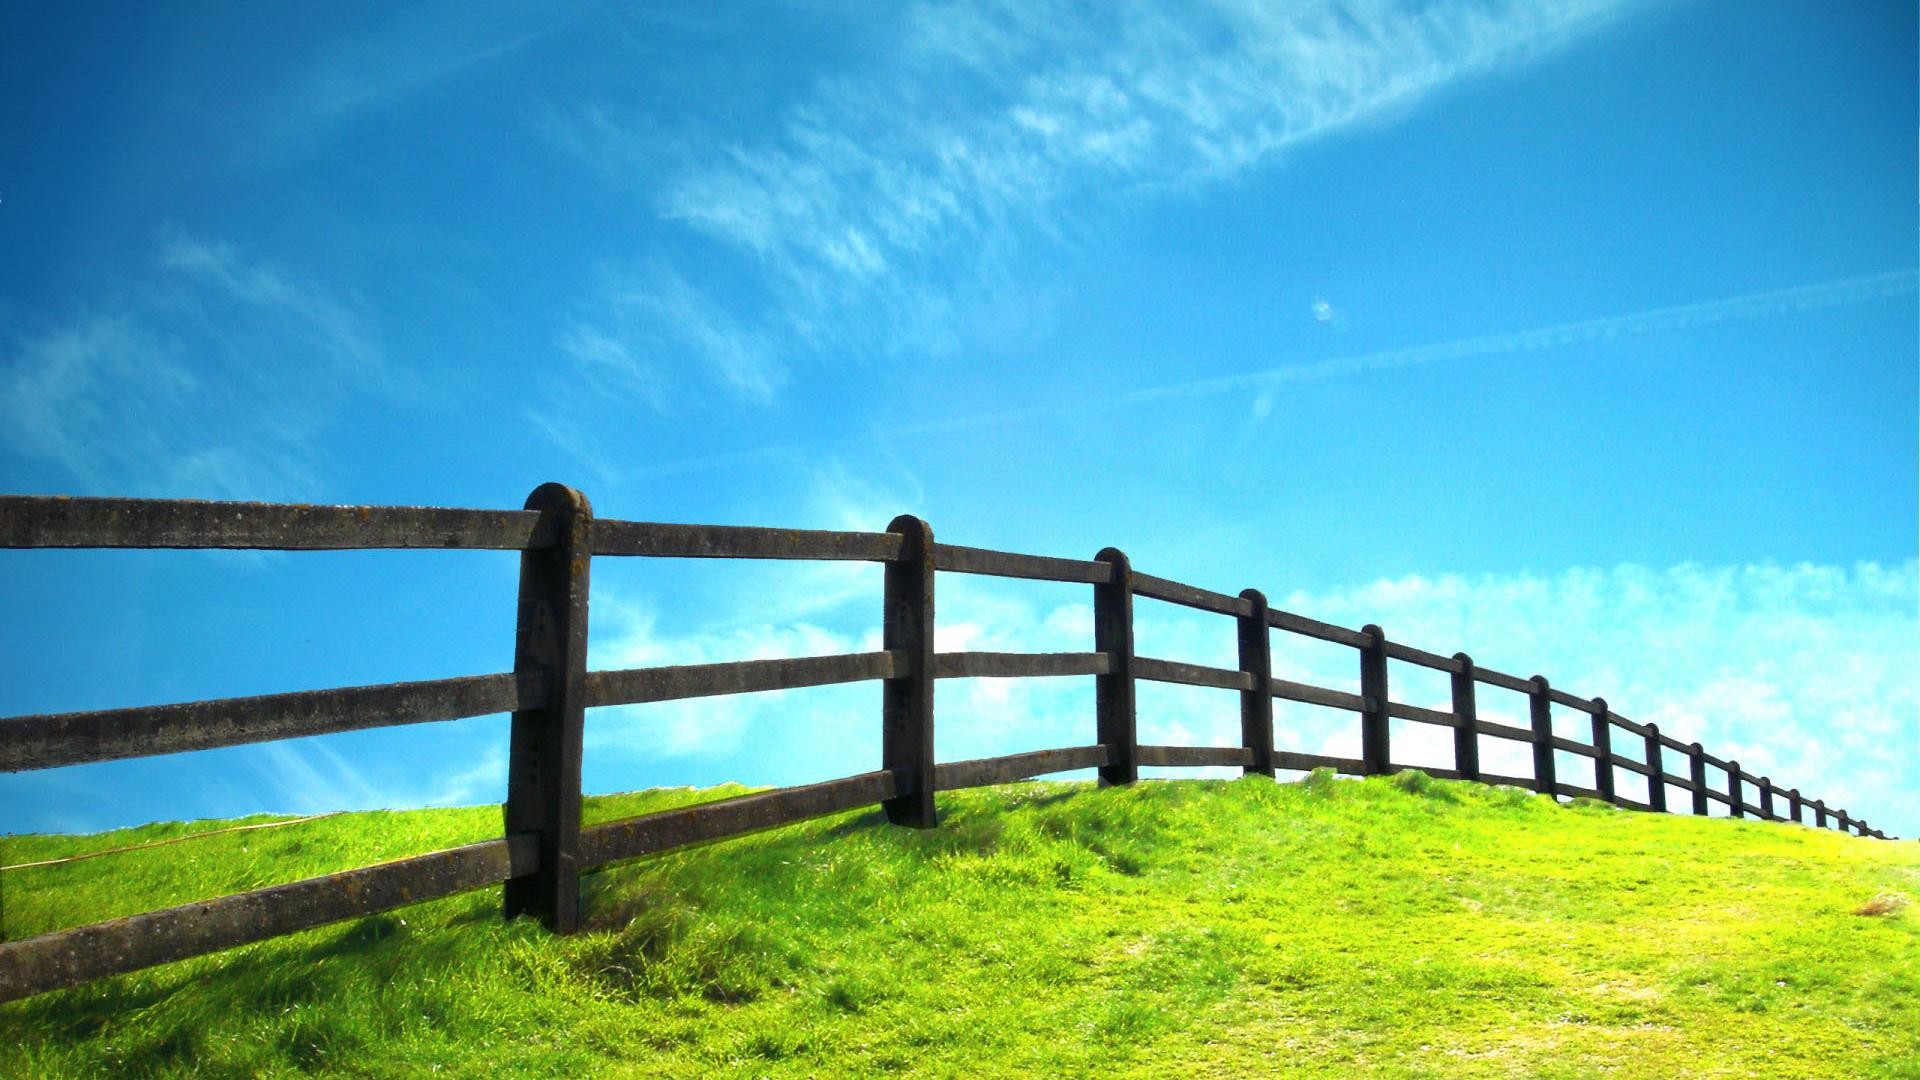 1920x1080  hd Grassland and fence nature scenery background wide  wallpapers:1280x800,1440x900,1680x1050